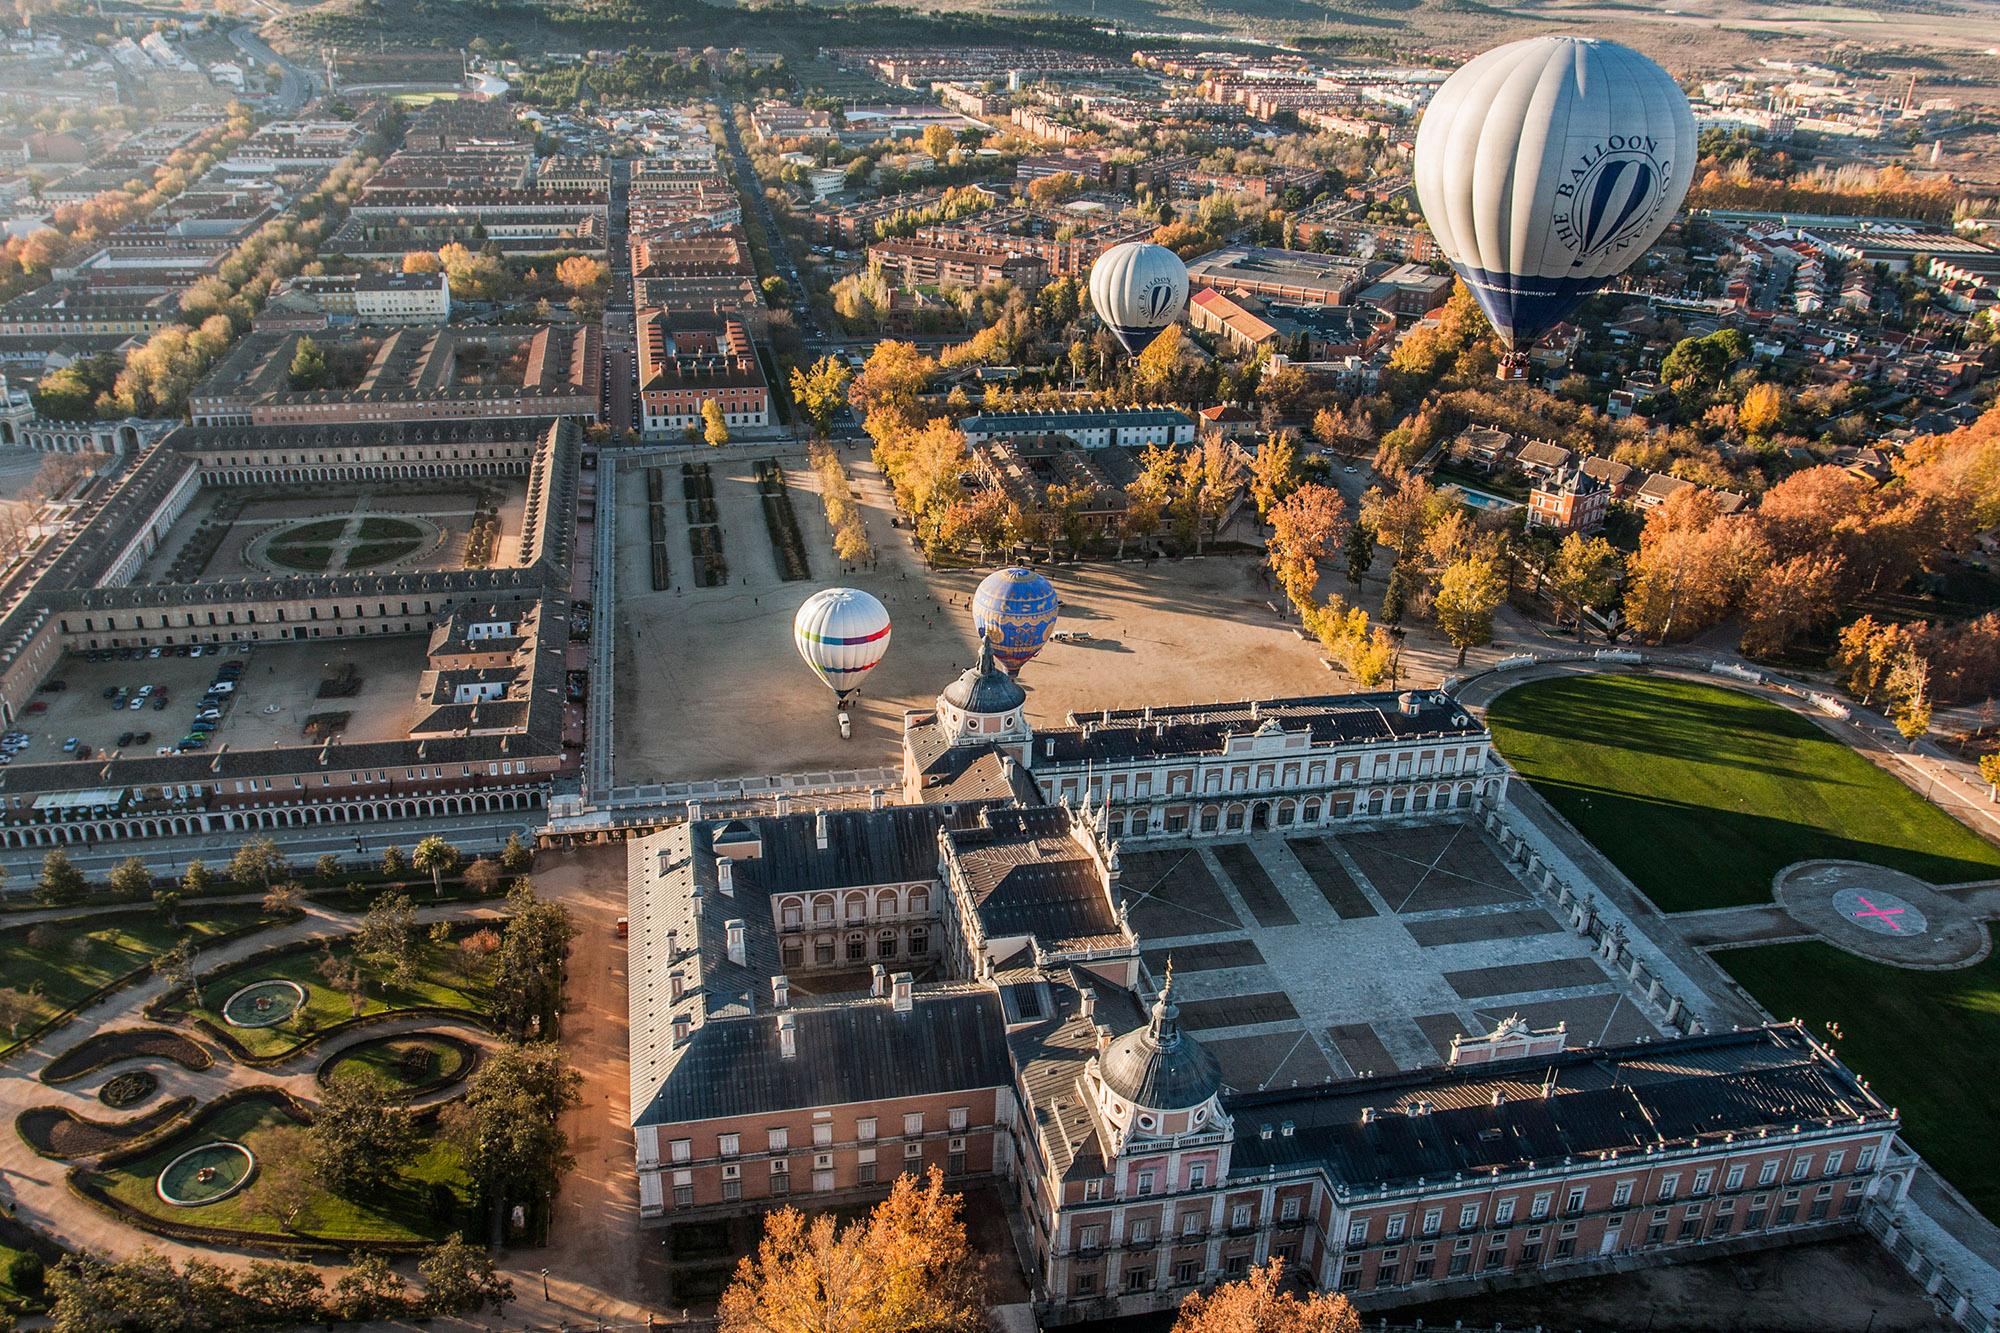 A balloon ride is a great way to appreciate the architecture and design of Aranjuez's landscape from above.- © Antonio Castillo López